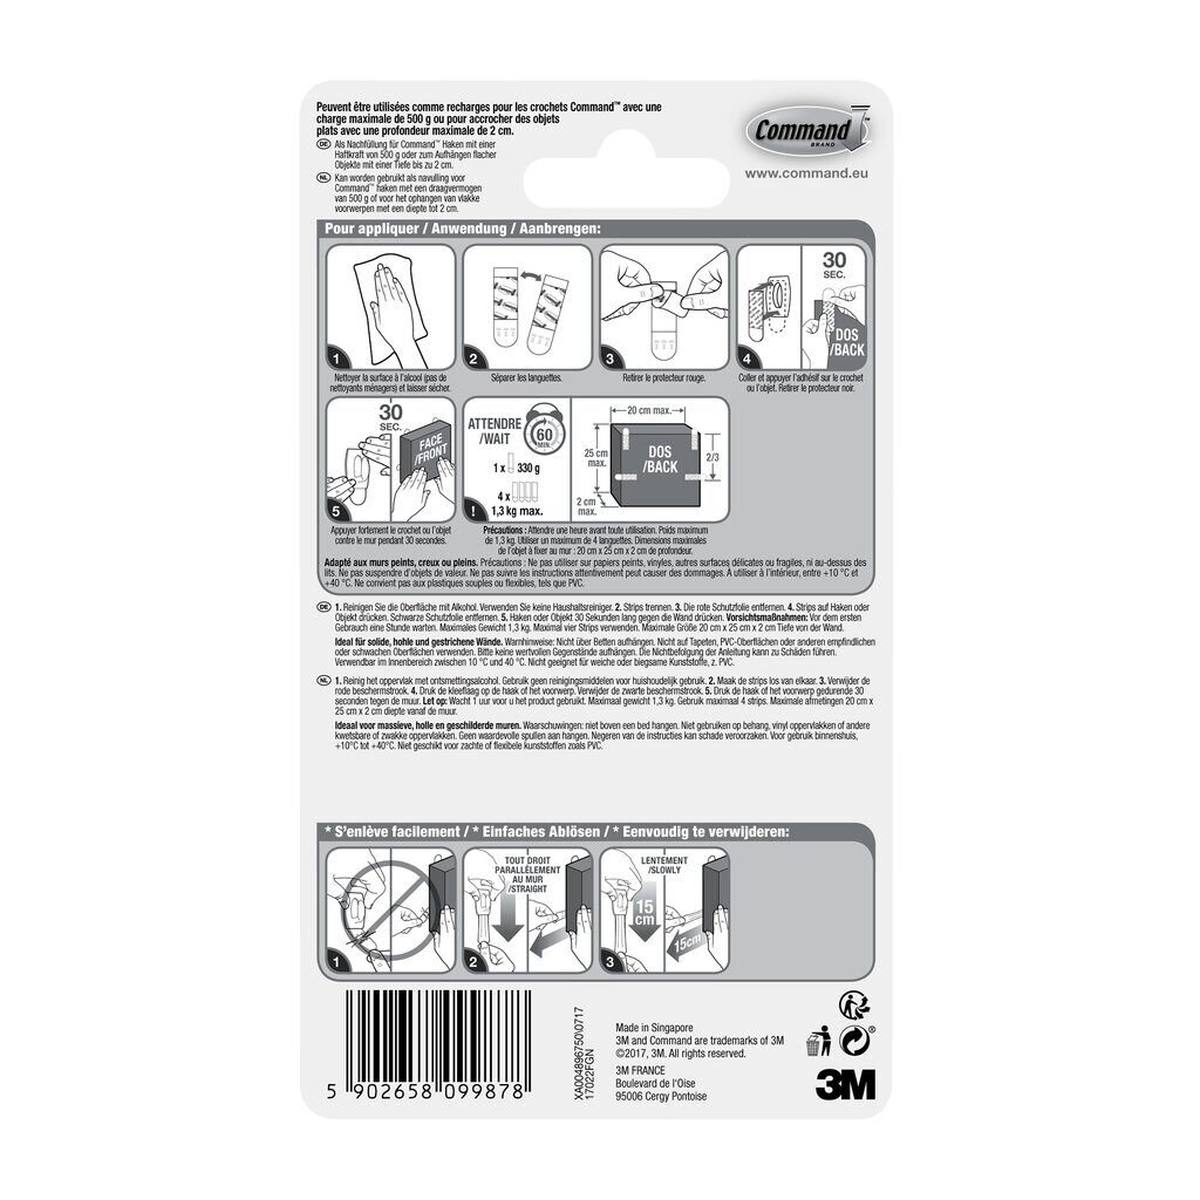 3M Command refill strips S, 17022, 16 white strips S, up to 450 g load capacity